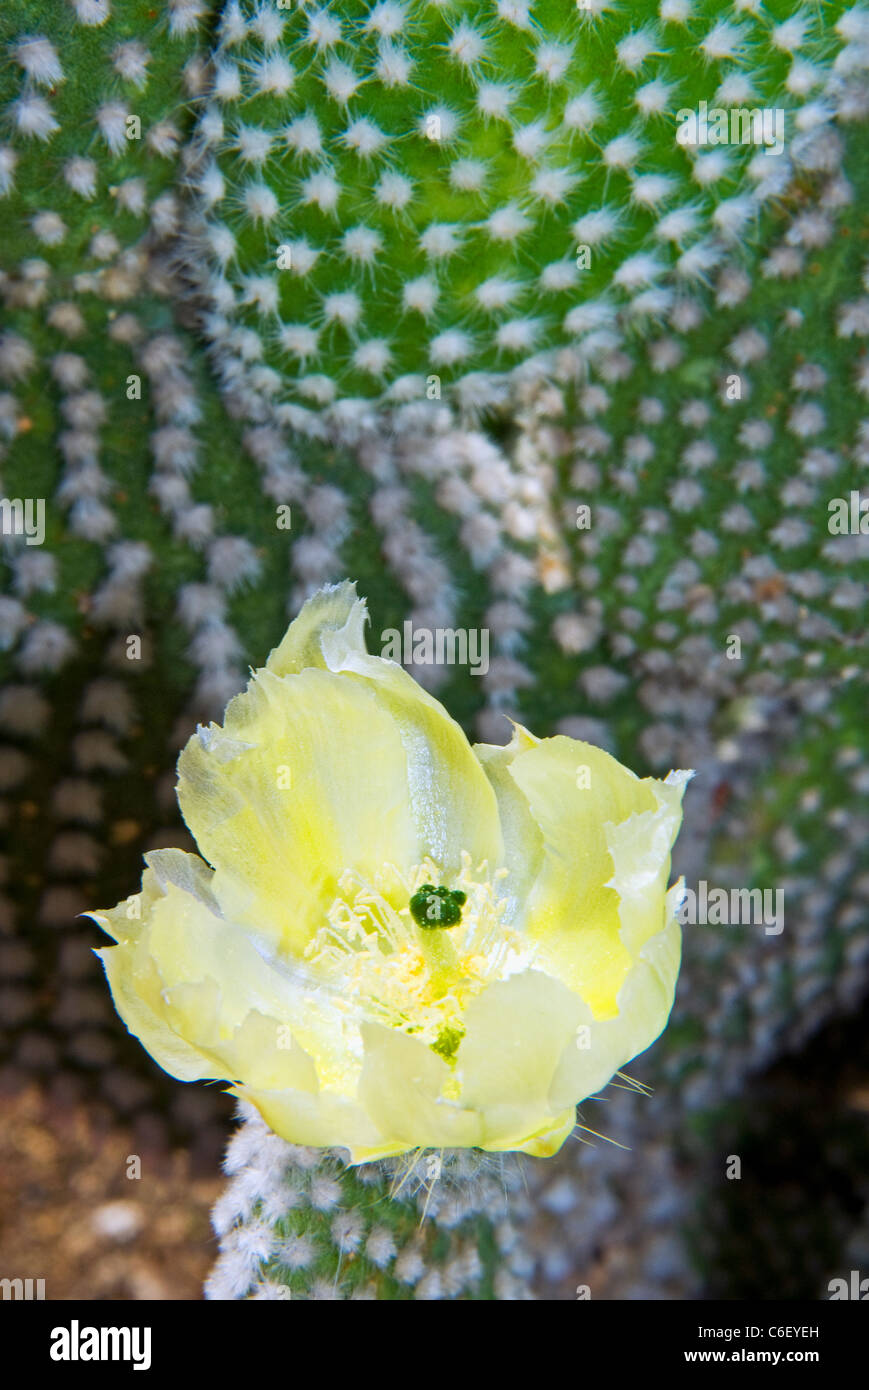 Fat plant and flower, (Opuntia microdasys var. albispina) Stock Photo